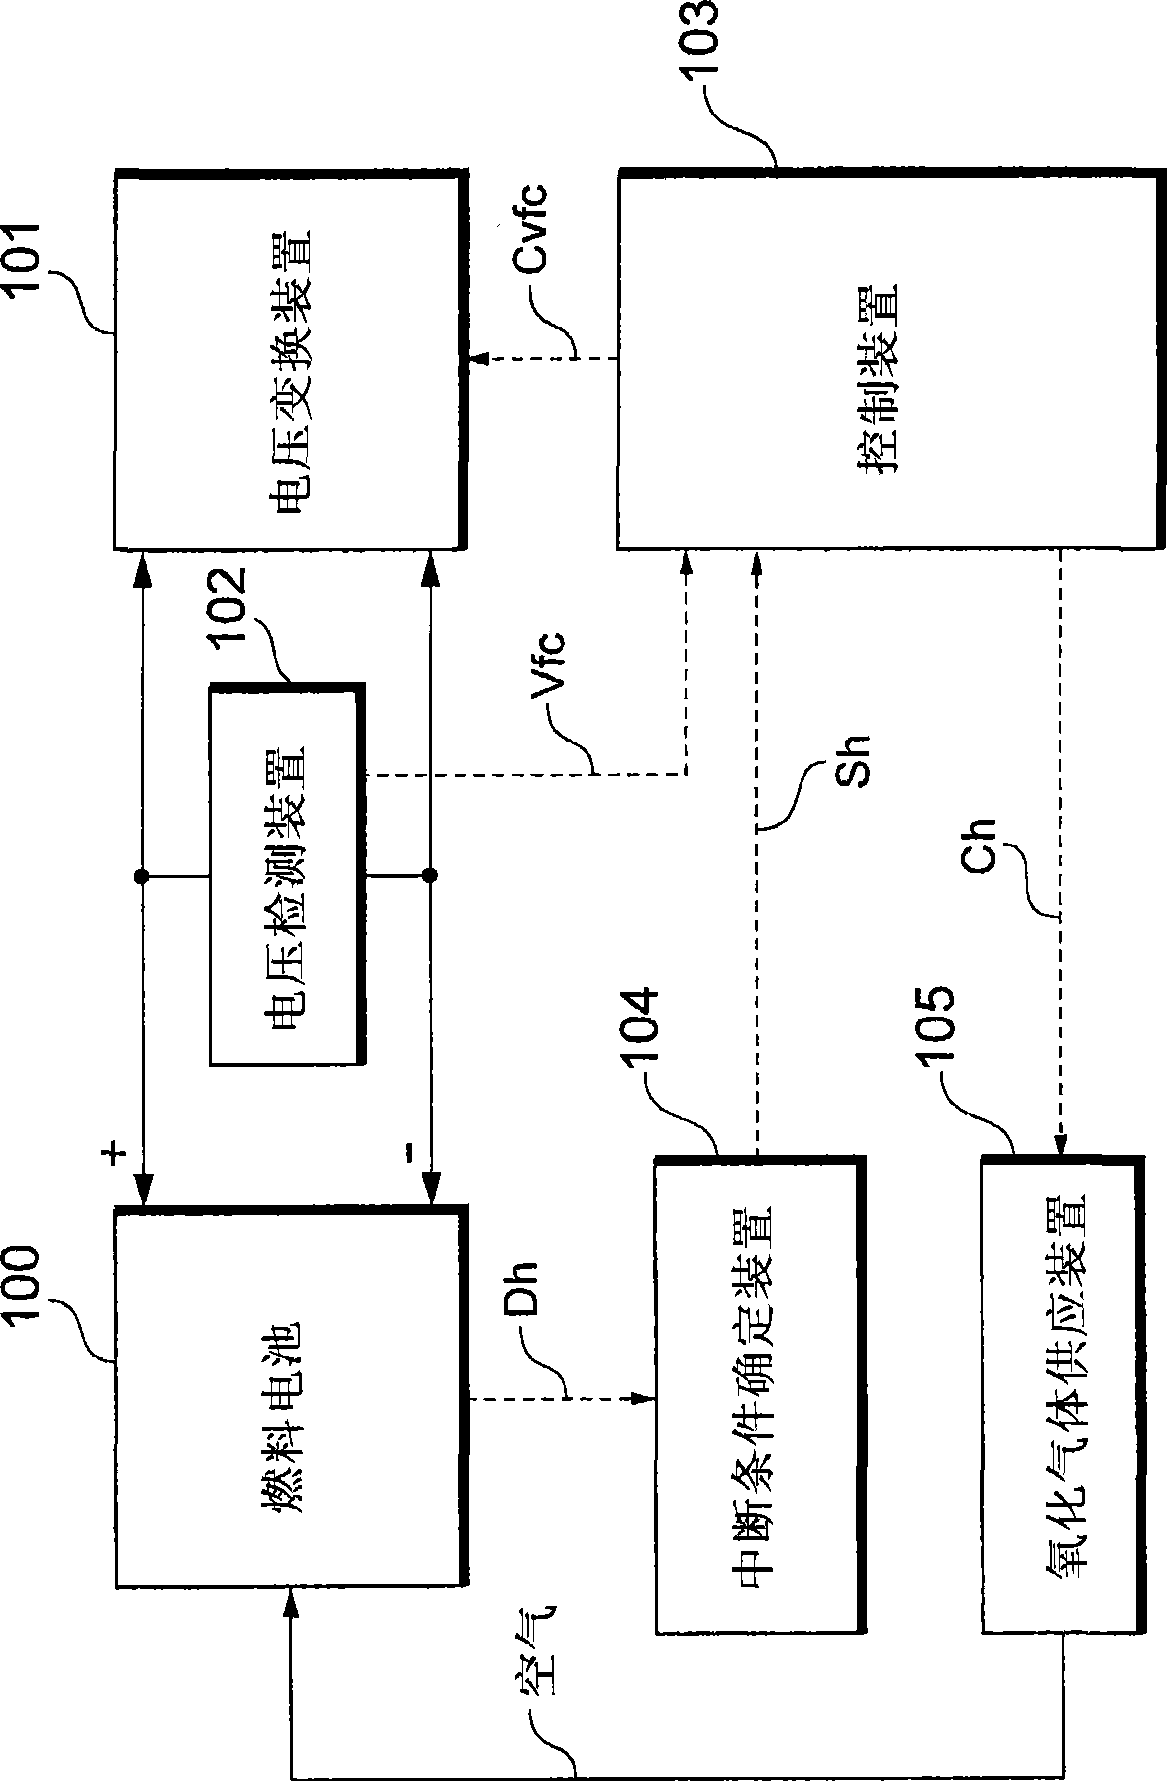 Fuel cell system, method for controlling the fuel cell system, and mobile object